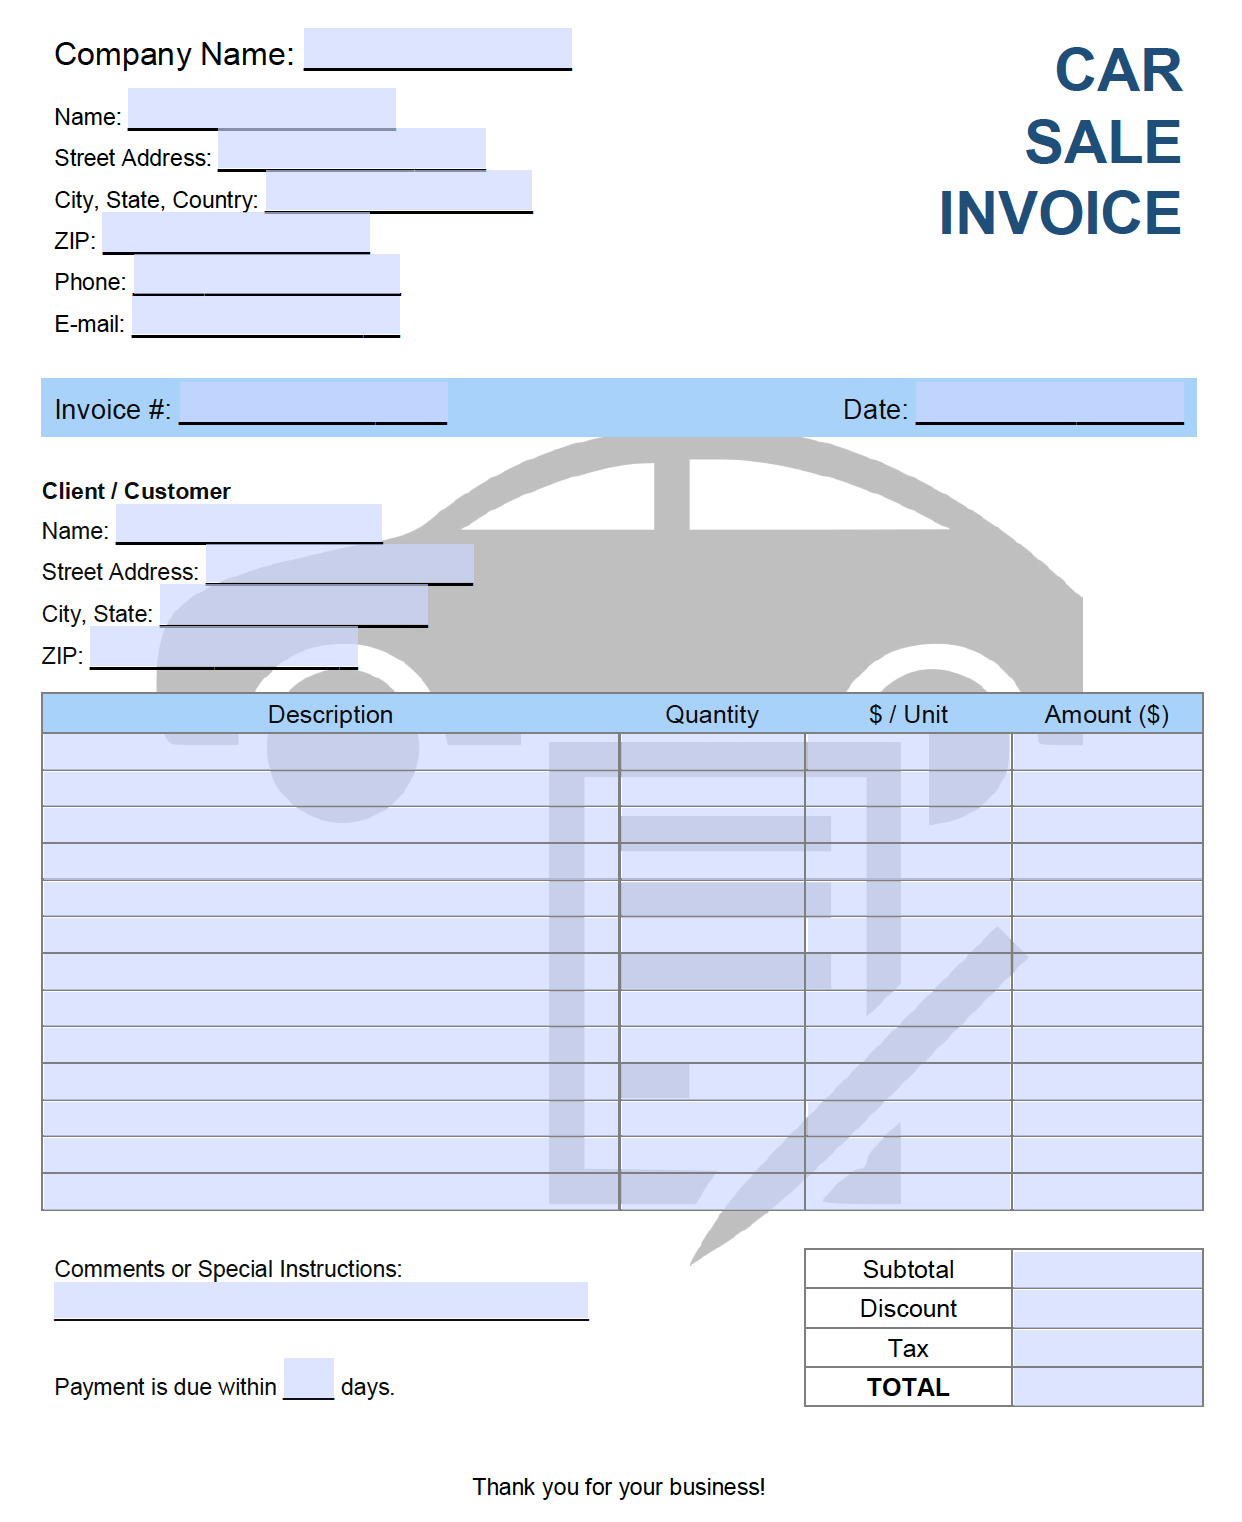 Free Car Sales Invoice Template  PDF  WORD  EXCEL Throughout Car Sales Invoice Template Free Download